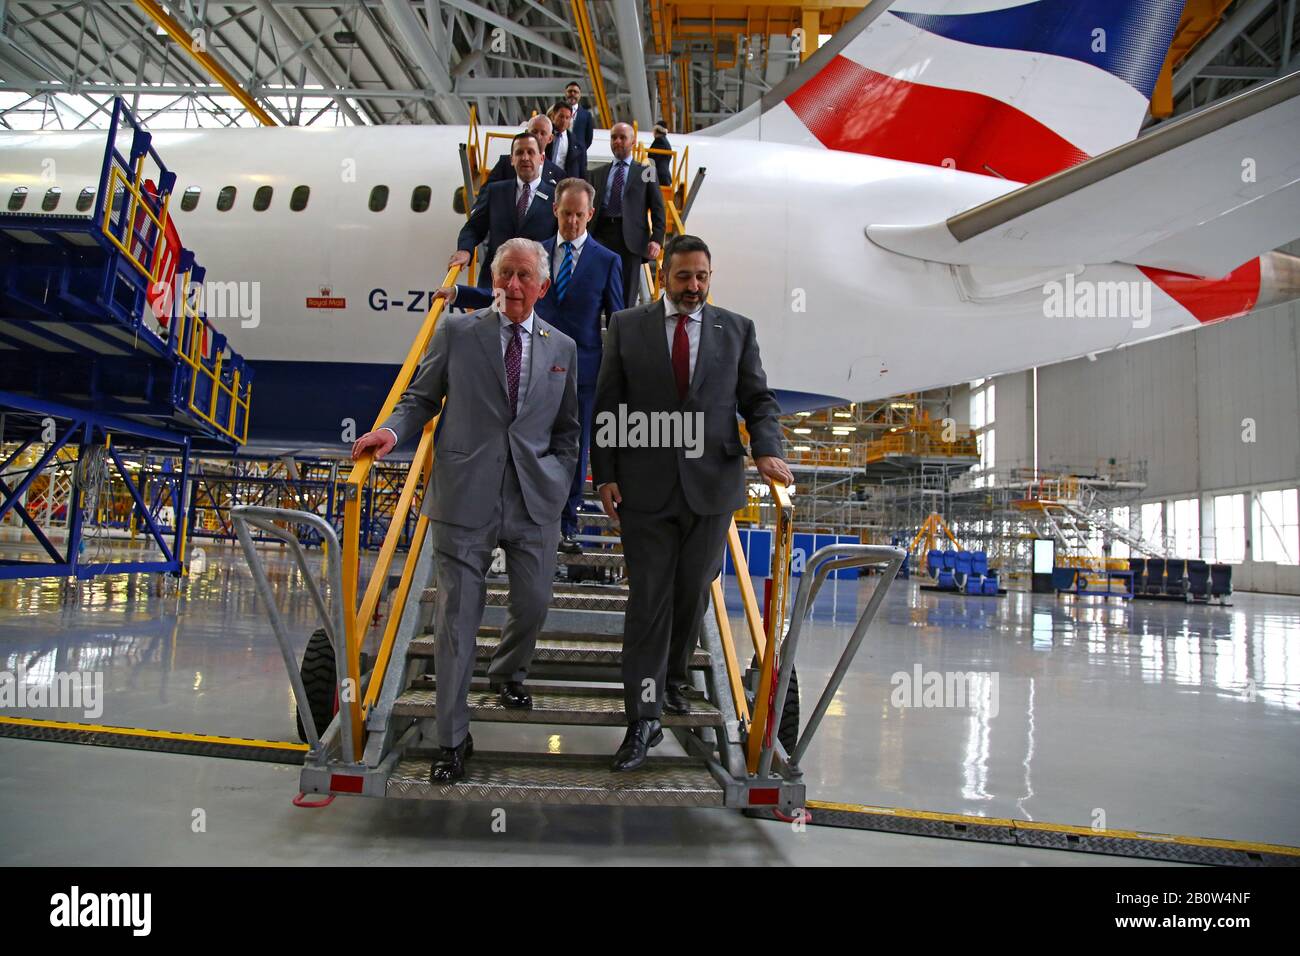 The Prince of Wales and British Airways CEO Alex Cruz walk down the steps after being shown around a Boeing 787-9 Dreamliner during a visit to the British Airways Maintenance Centre at Cardiff Airport, Wales, celebrating the company's 100th anniversary. Stock Photo